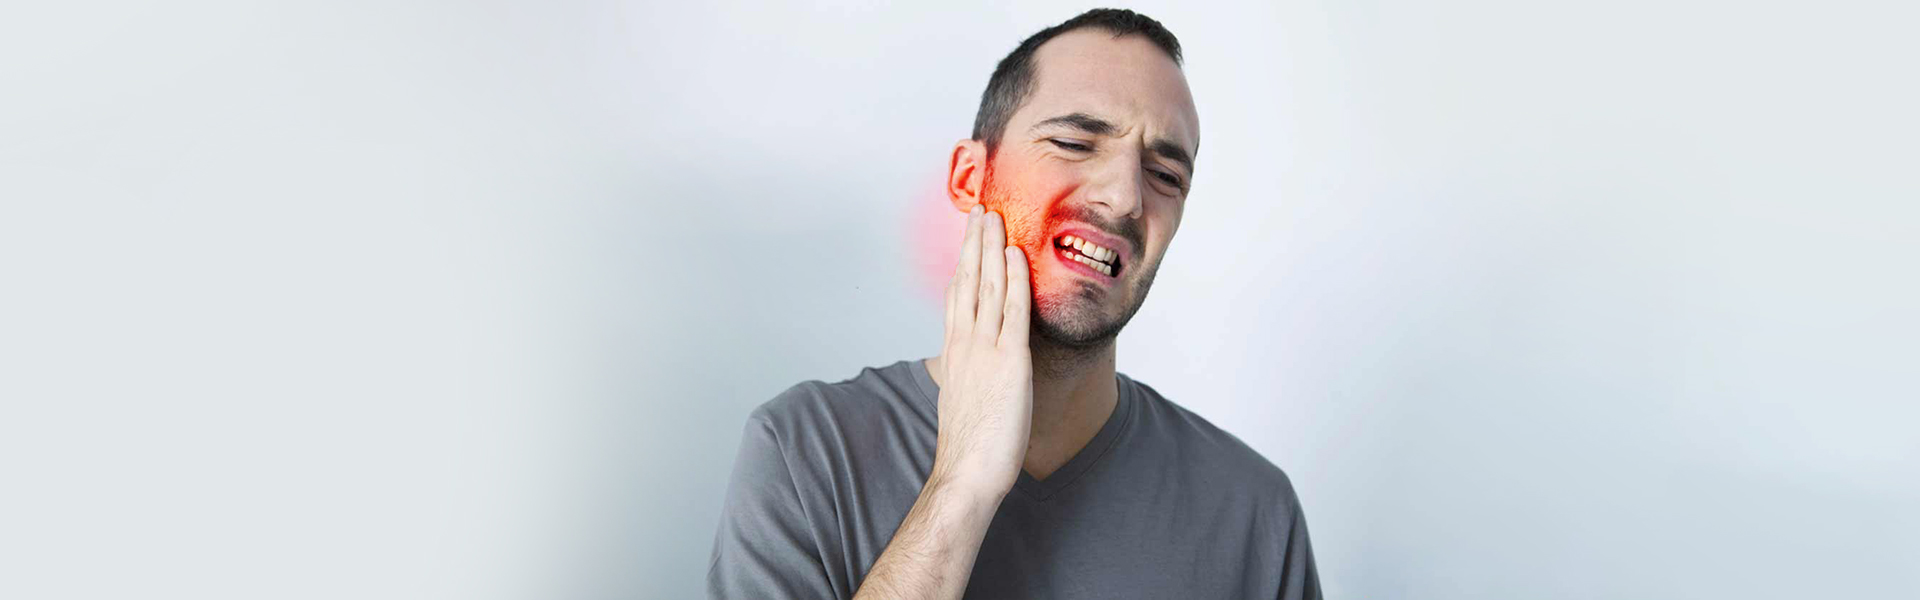 A Basic Guide To TMJ / TMD Treatment